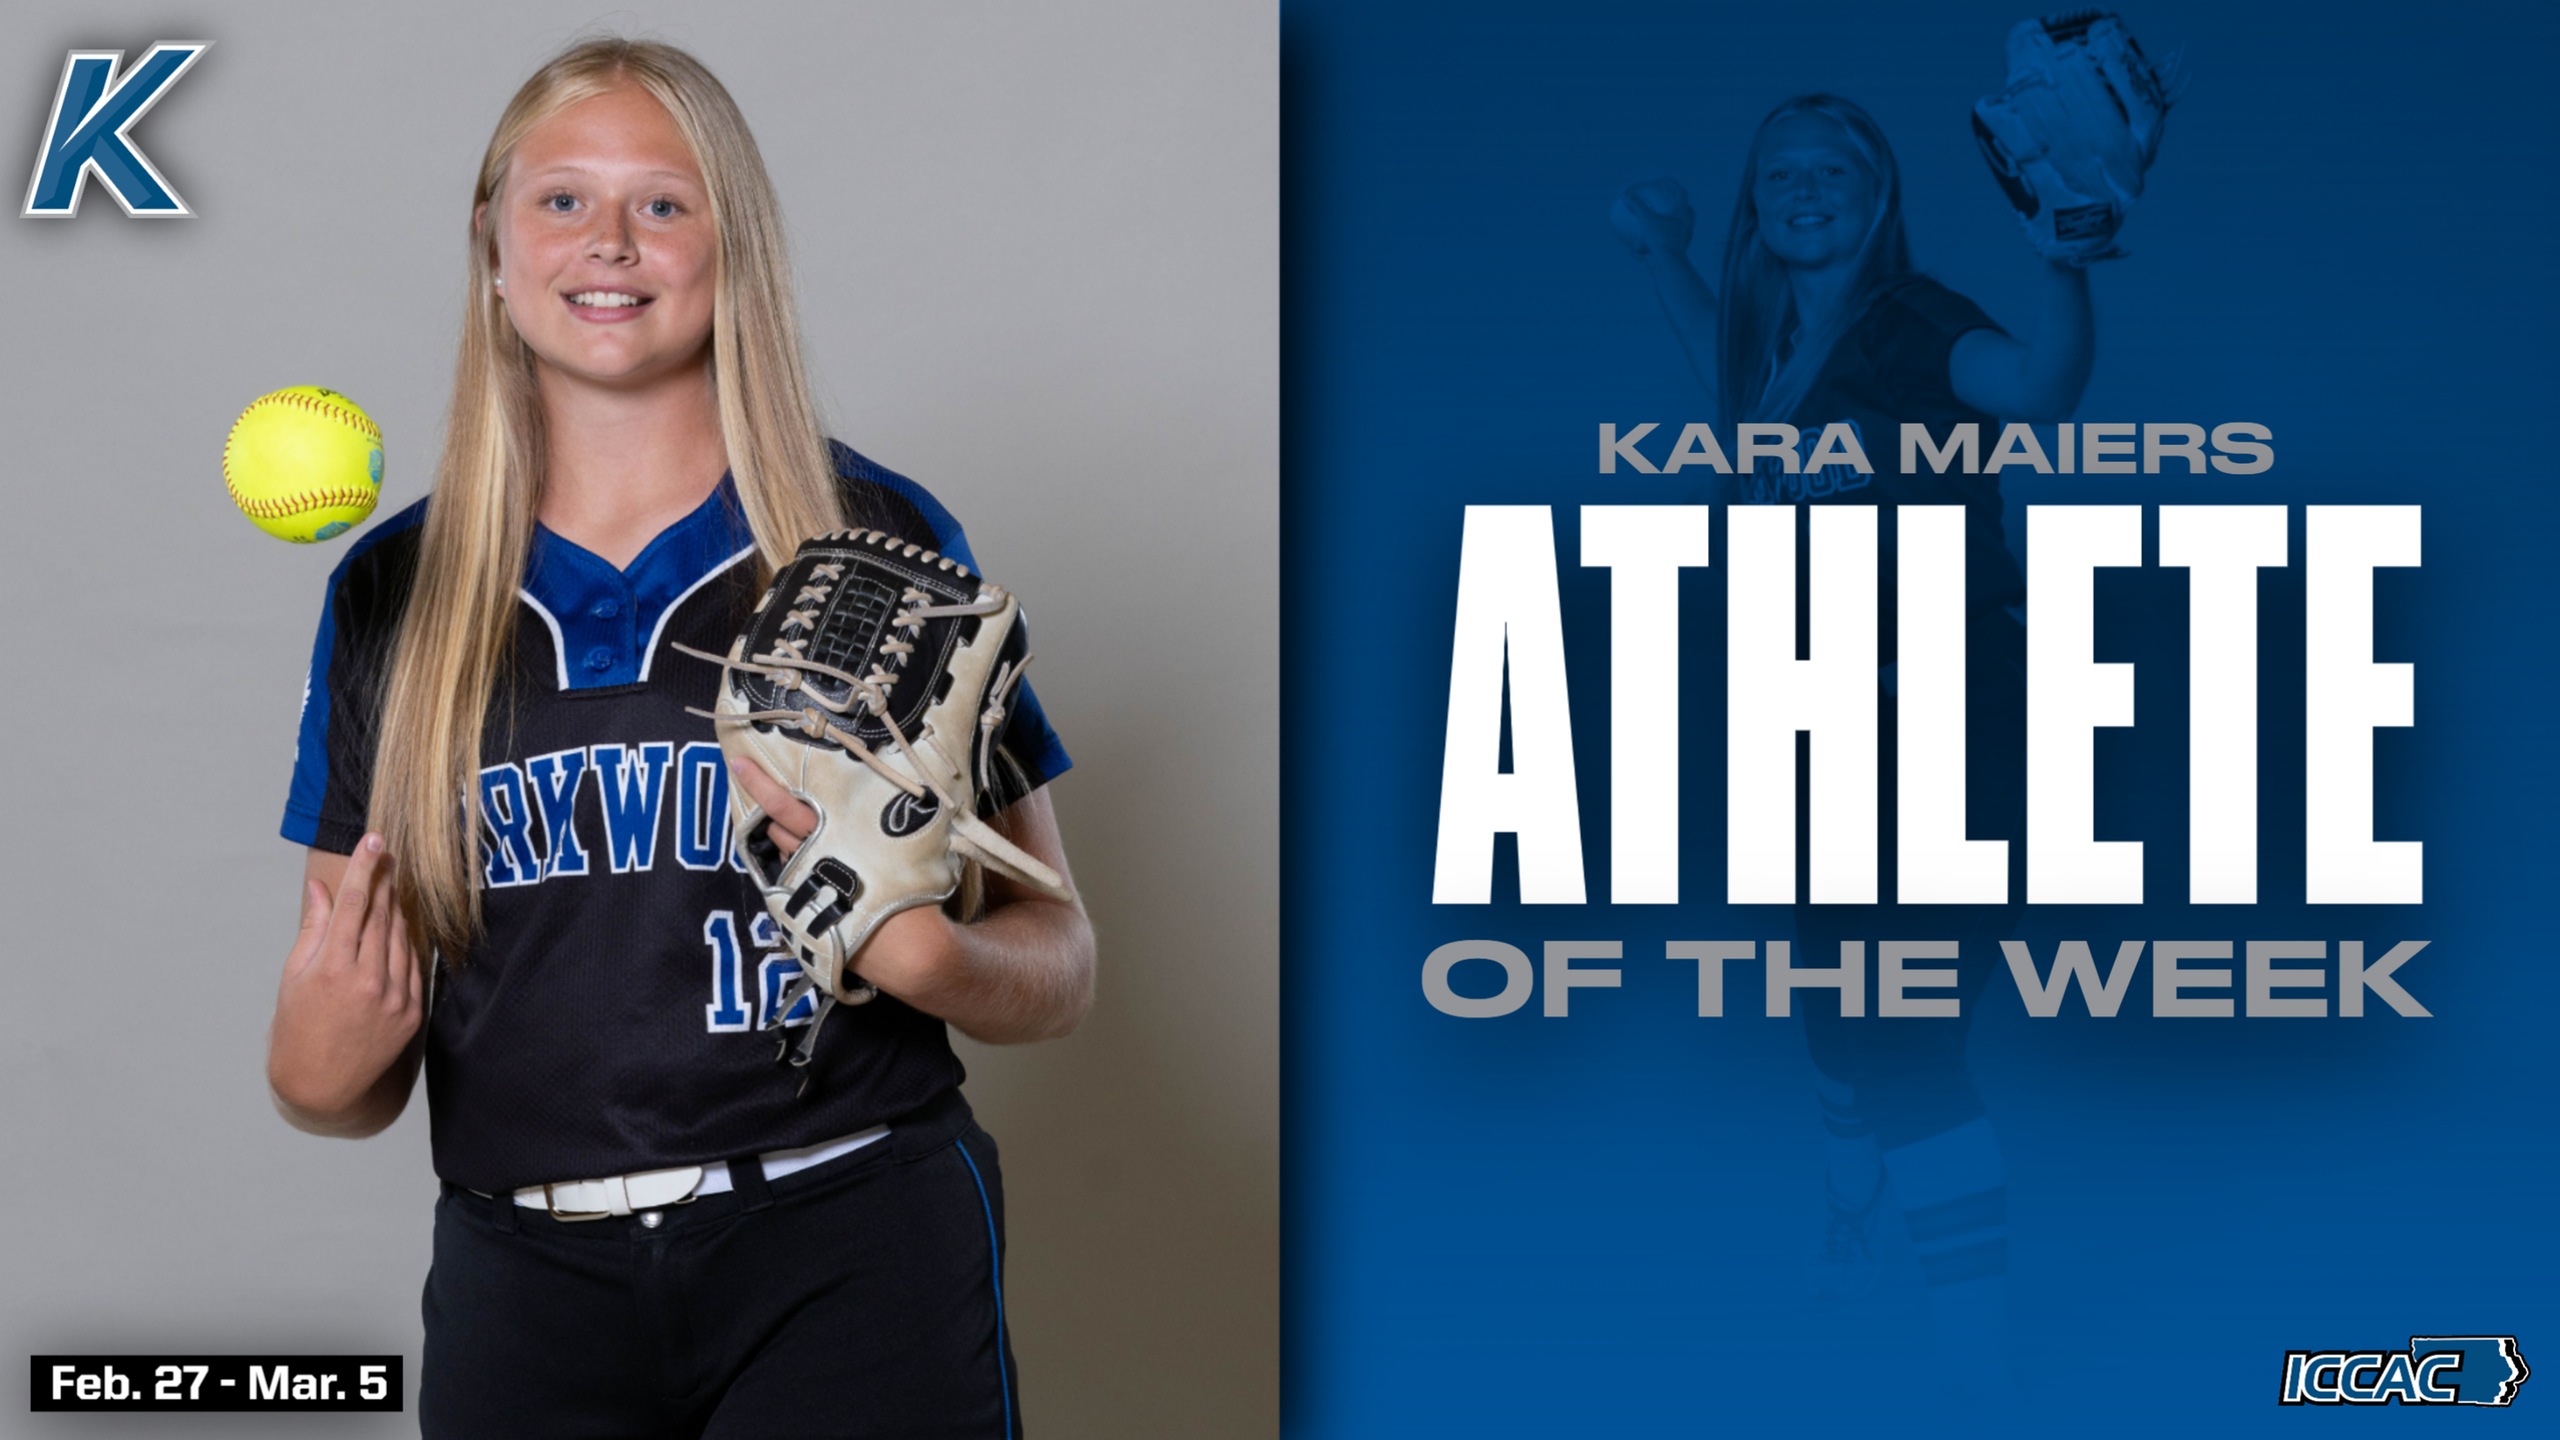 Maiers chosen as ICCAC Athlete of the Week | February 27 - March 5